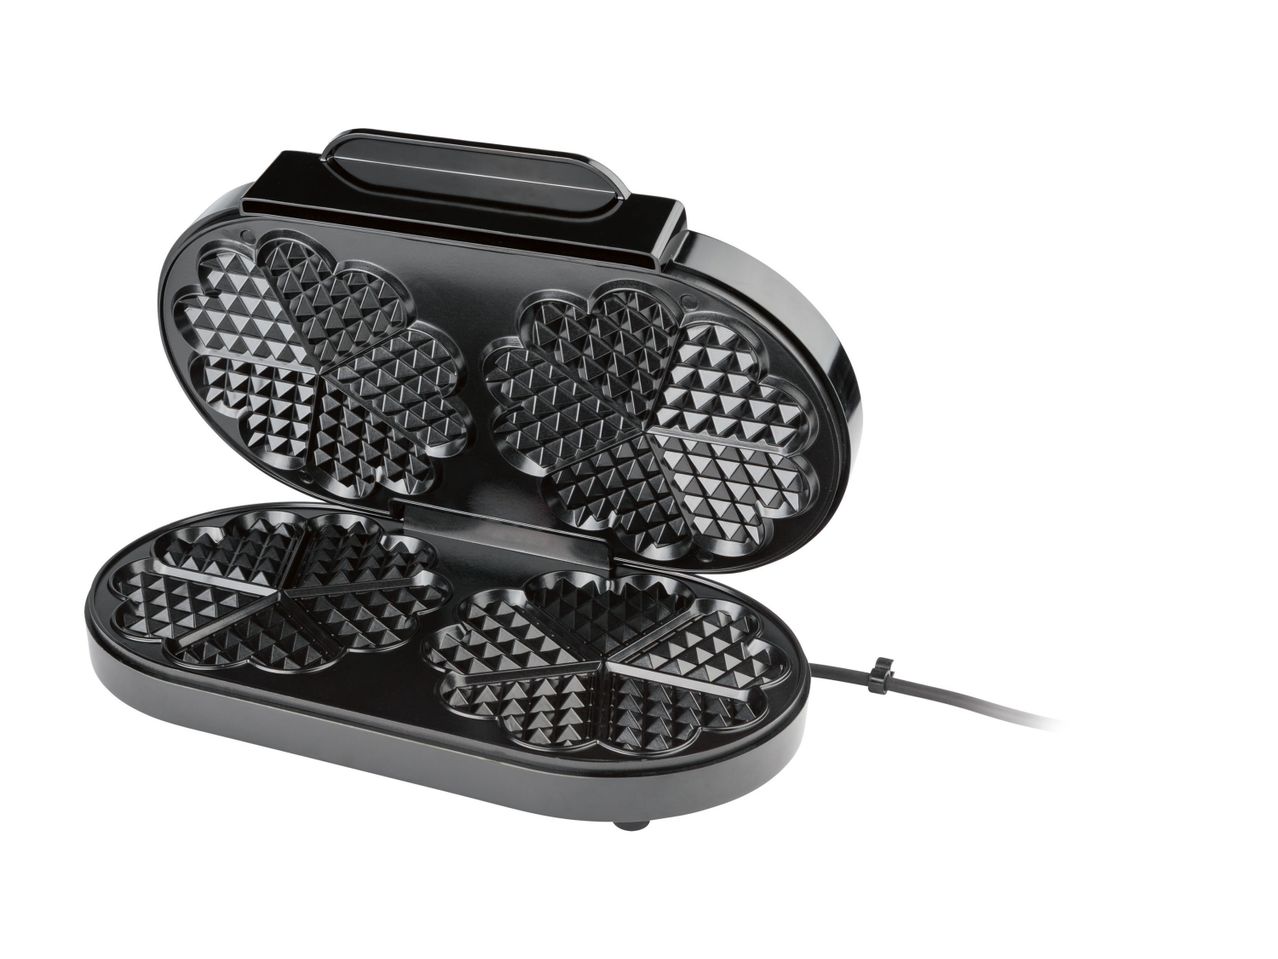 Go to full screen view: Double Waffle Maker - Image 2